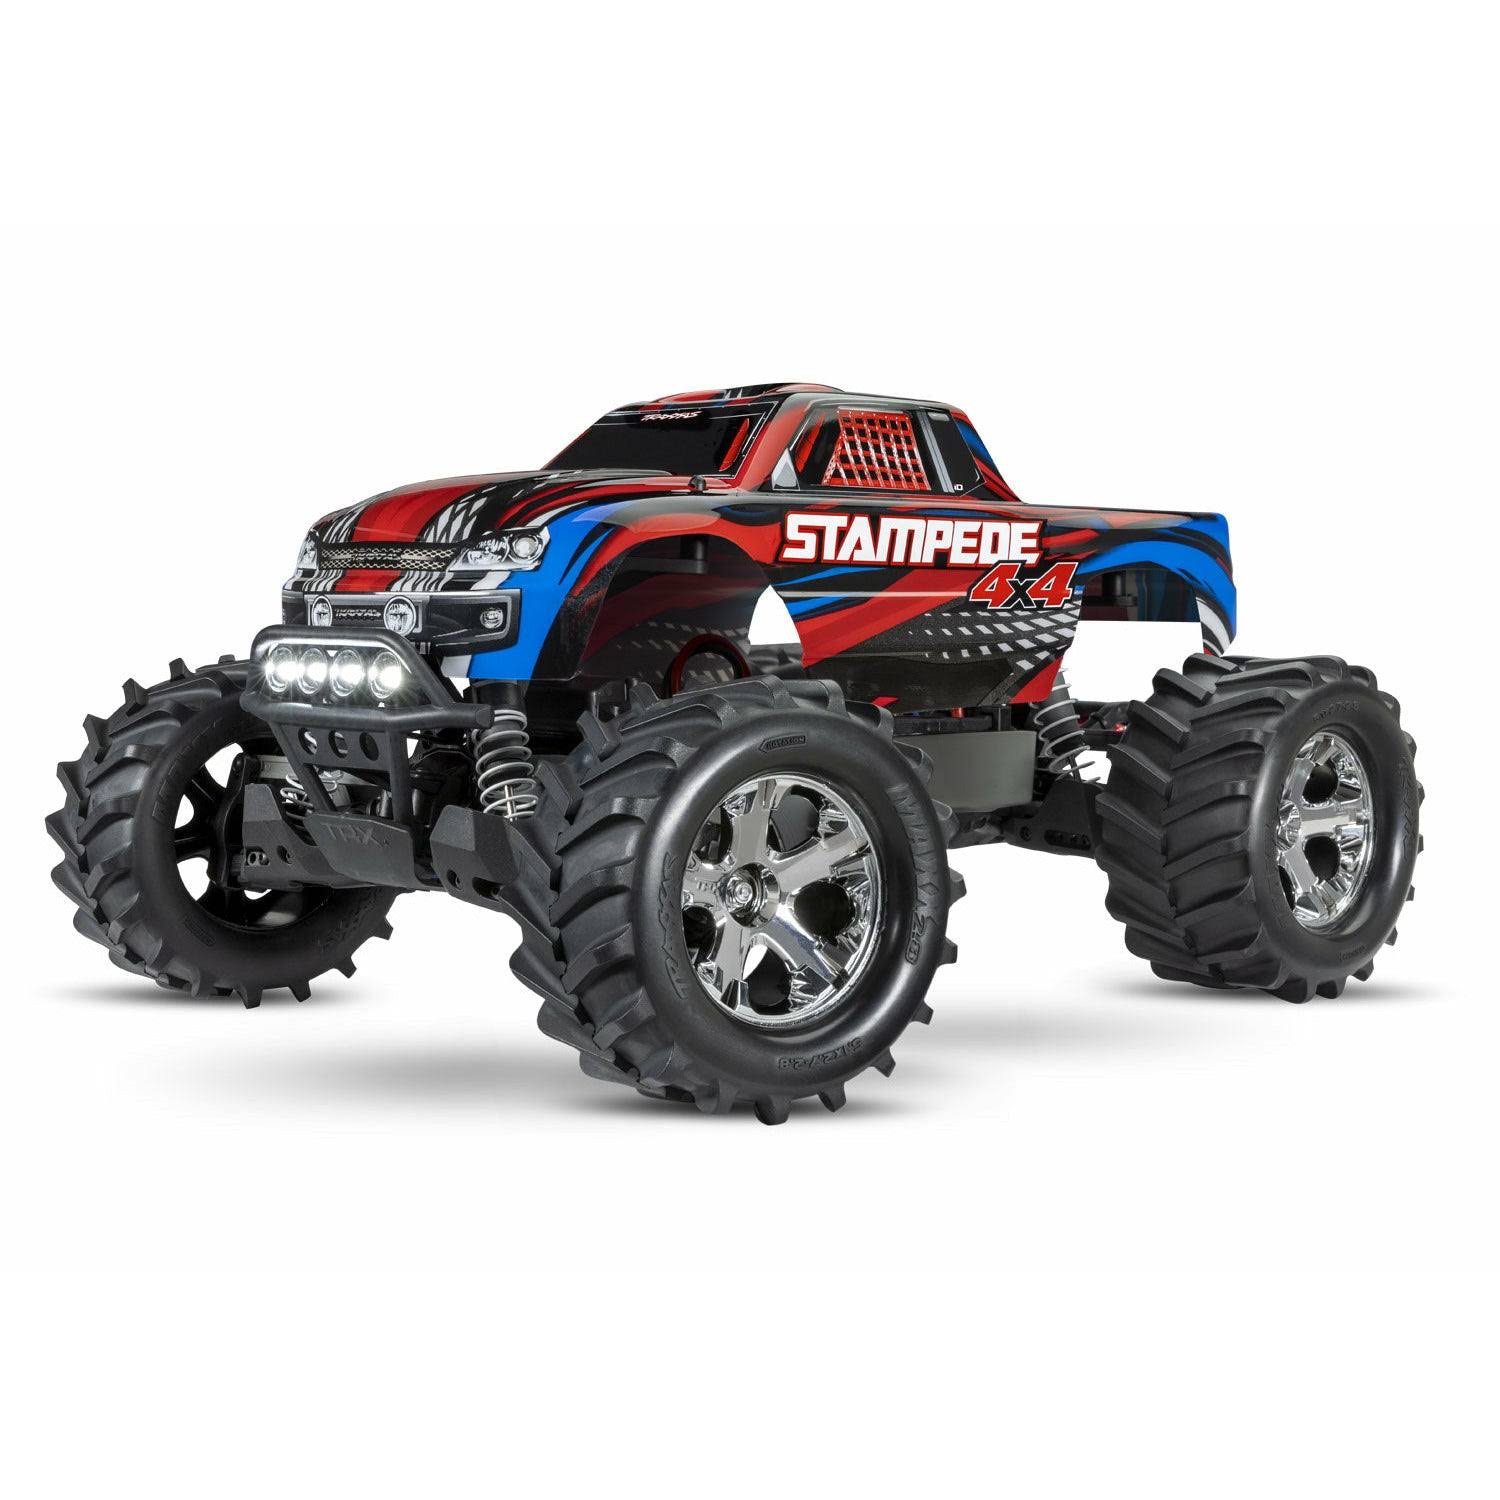 Traxxas 1/10 Stampede 4x4 With LED Lights Red